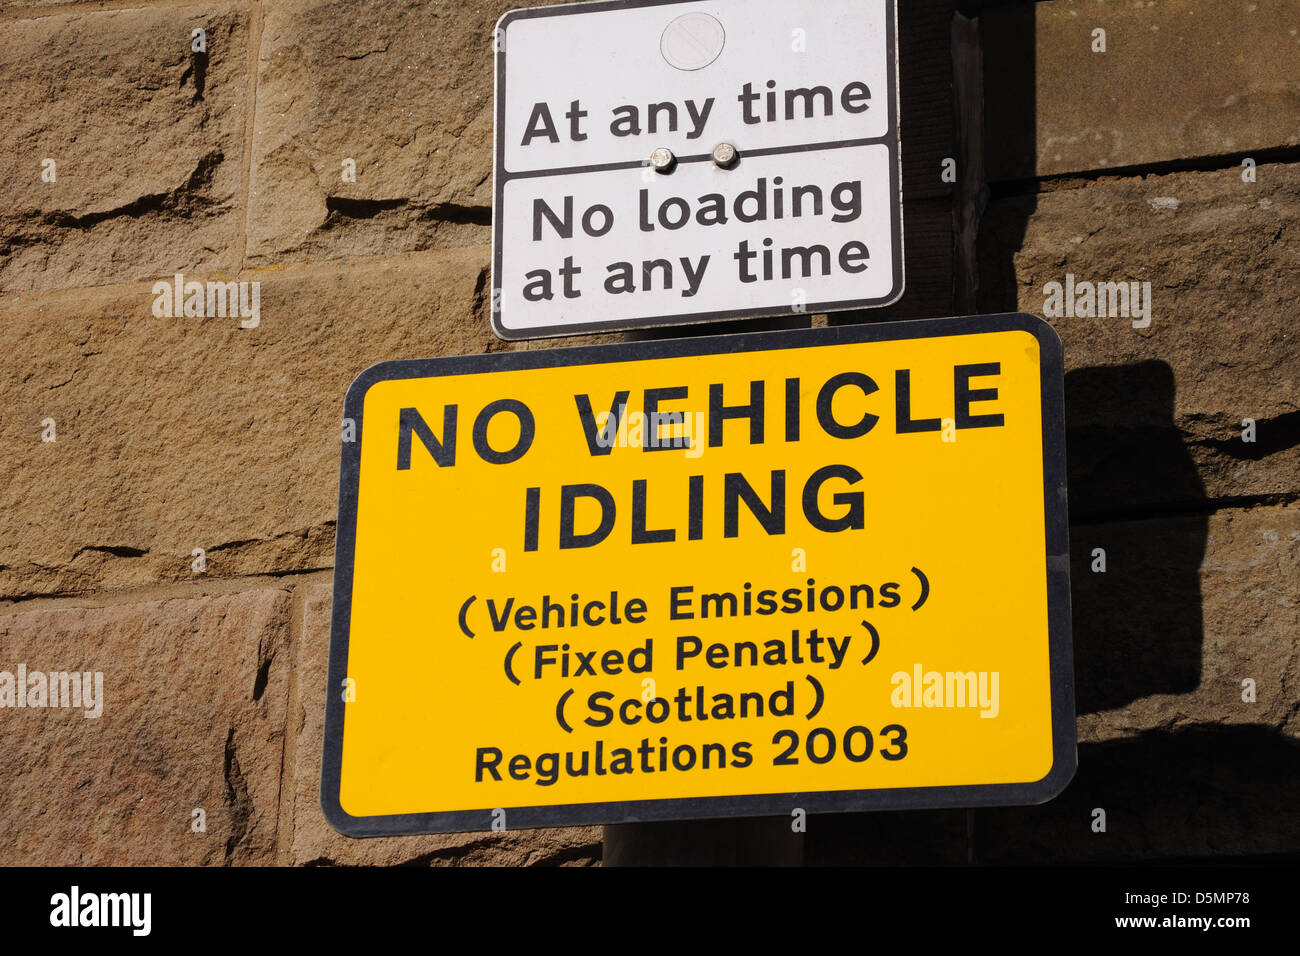 Vehicle emissions 2003 sign on wall in Scotland, UK. Stock Photo